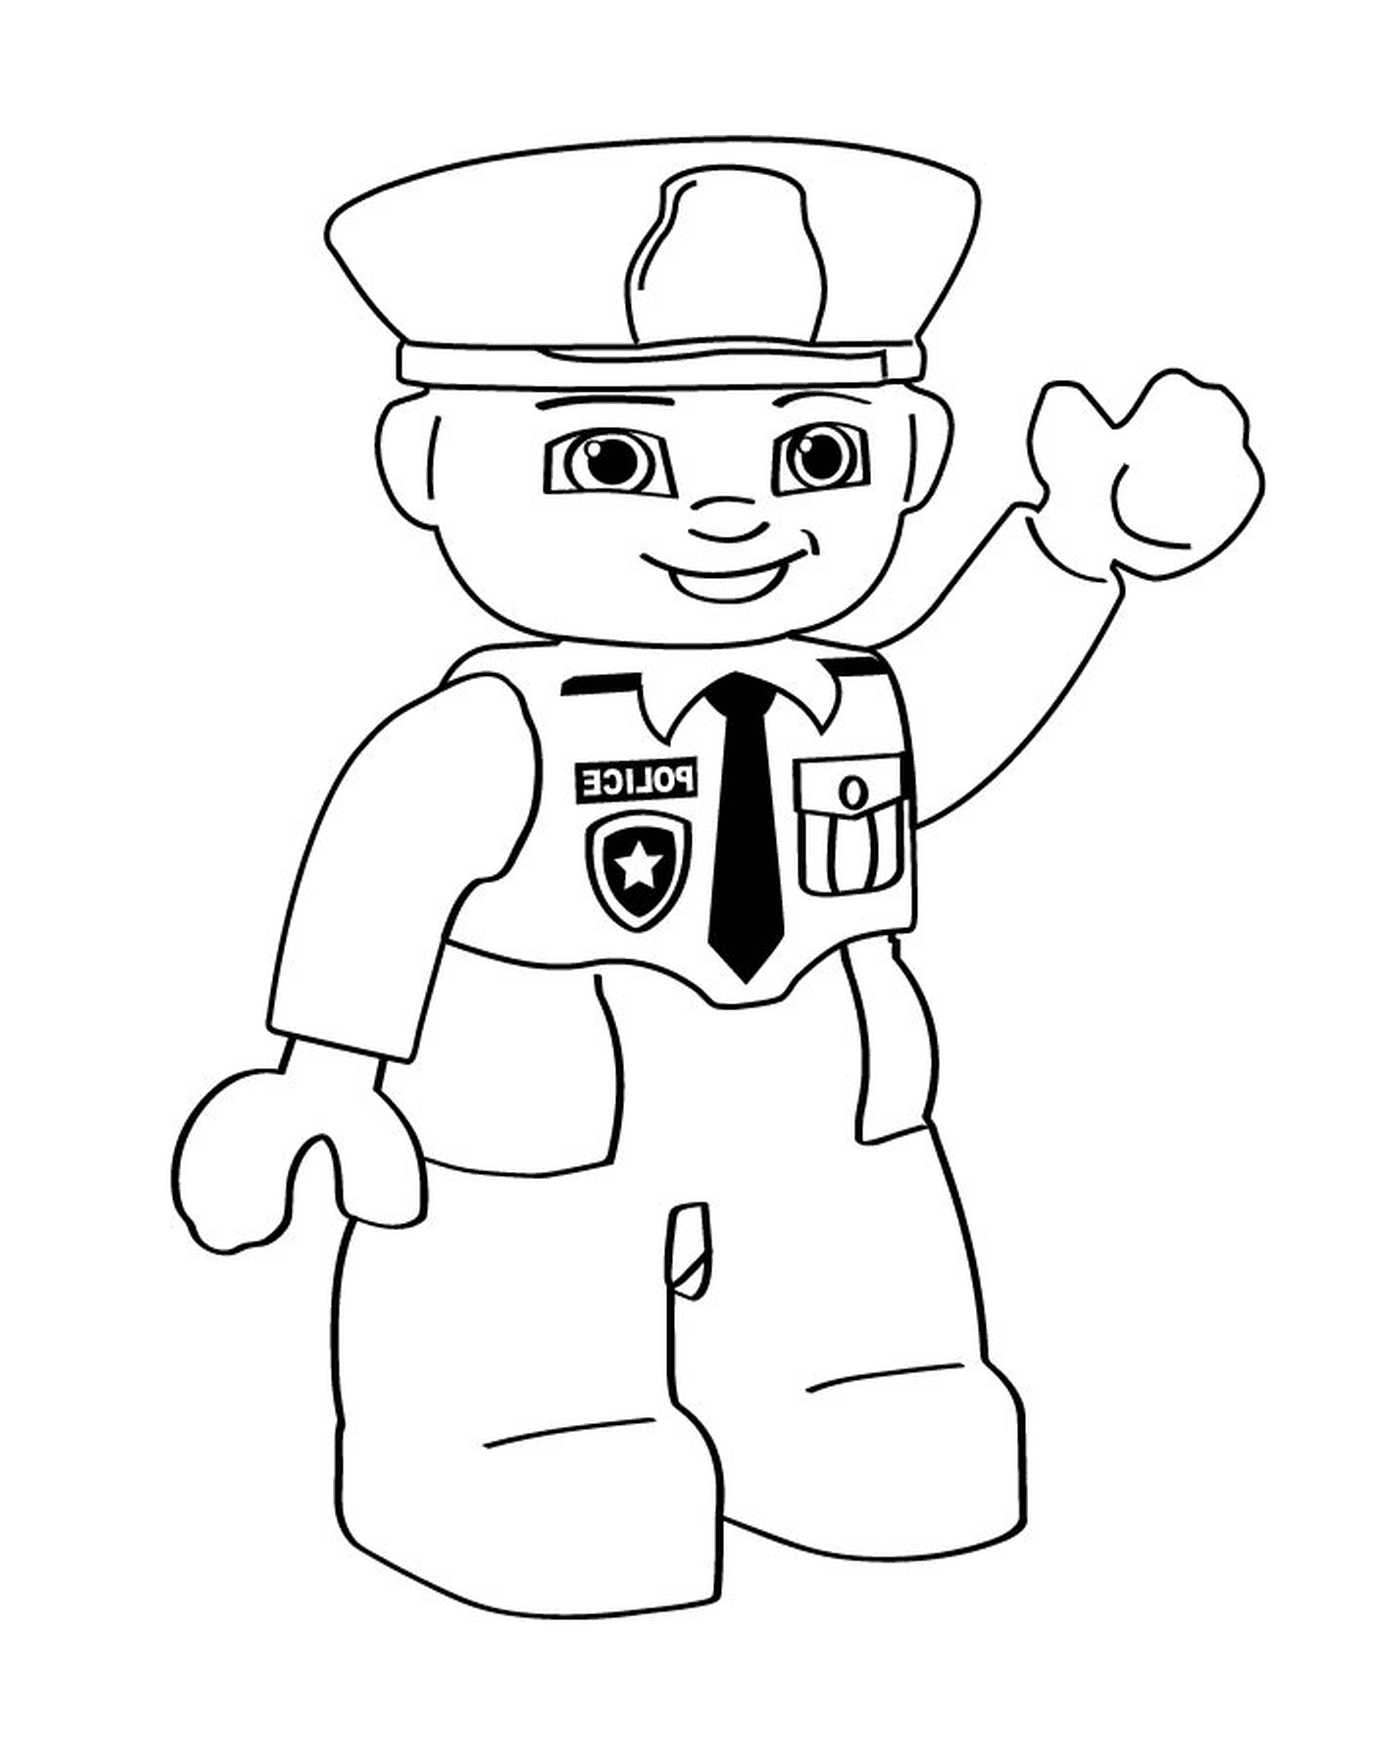  Policeman Lego on special mission 